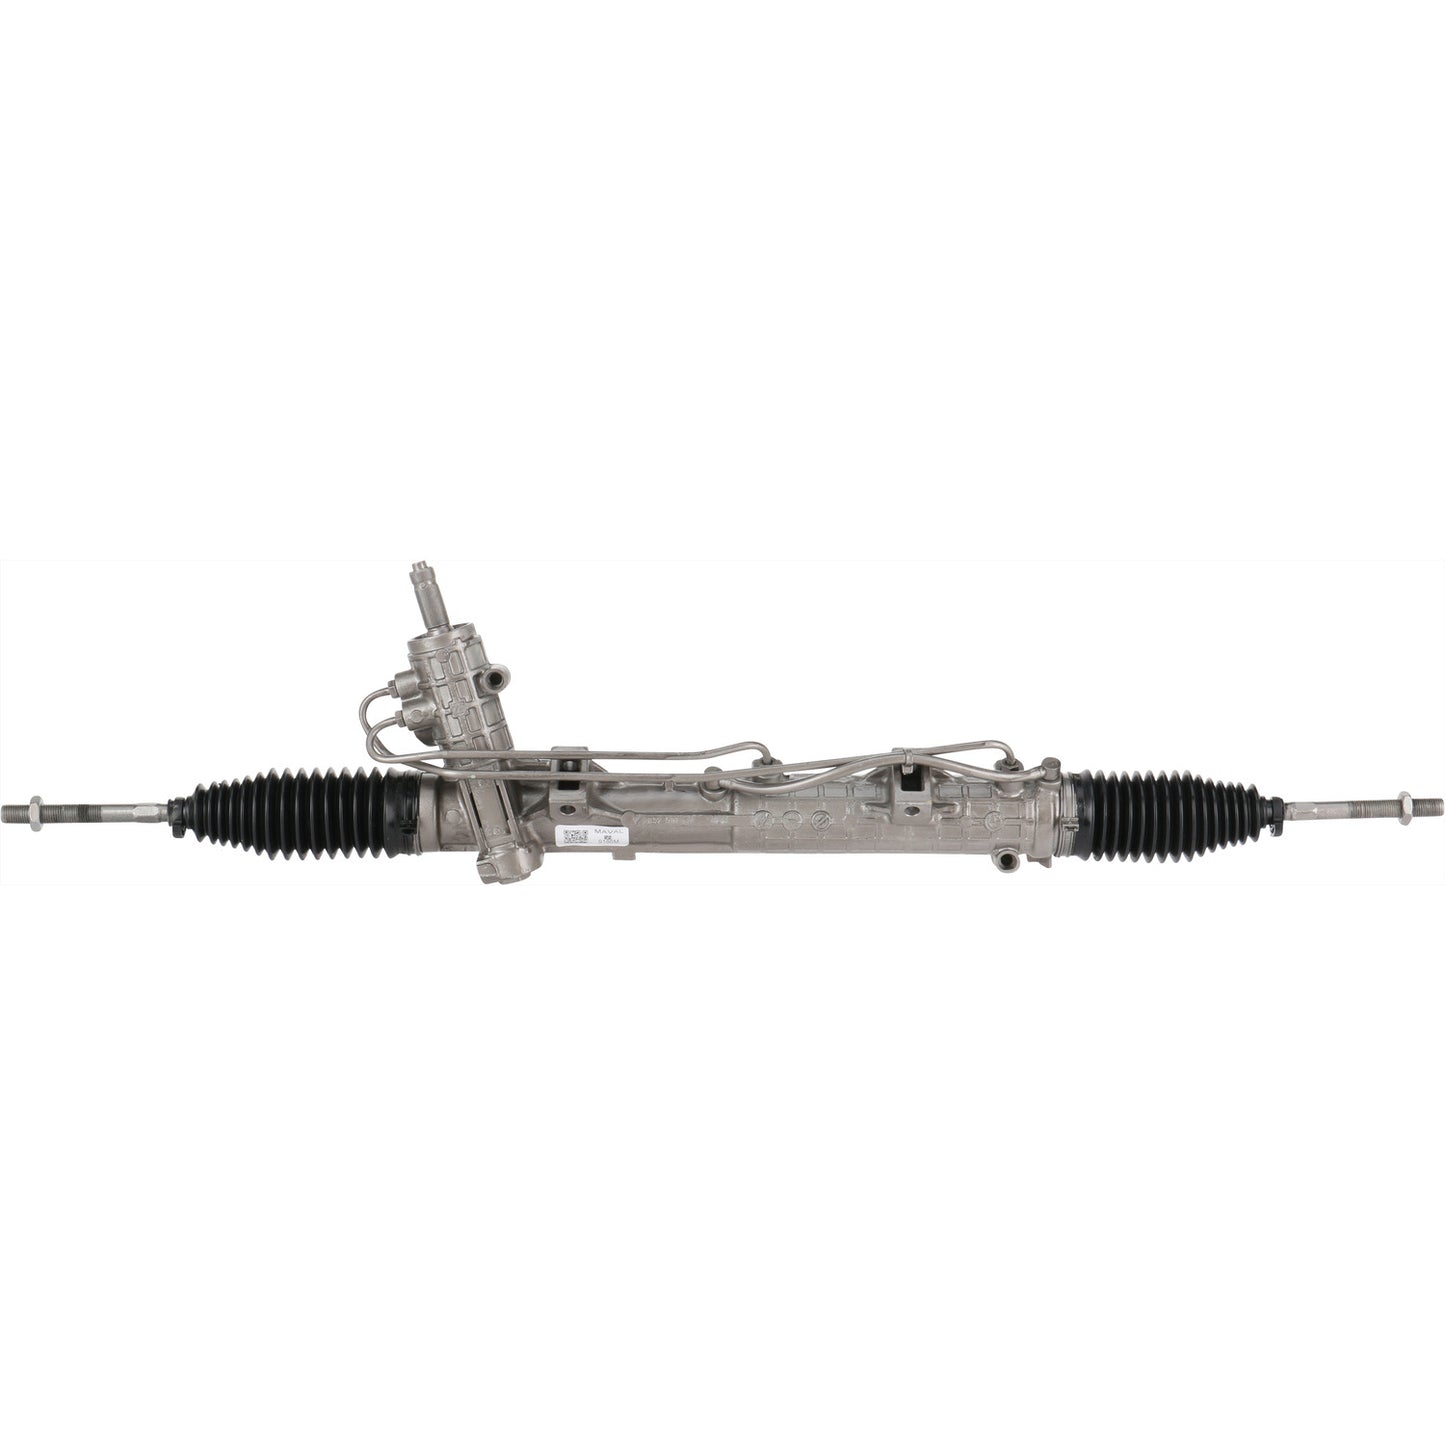 Rack and Pinion Assembly - MAVAL - Hydraulic Power - Remanufactured - 9186M